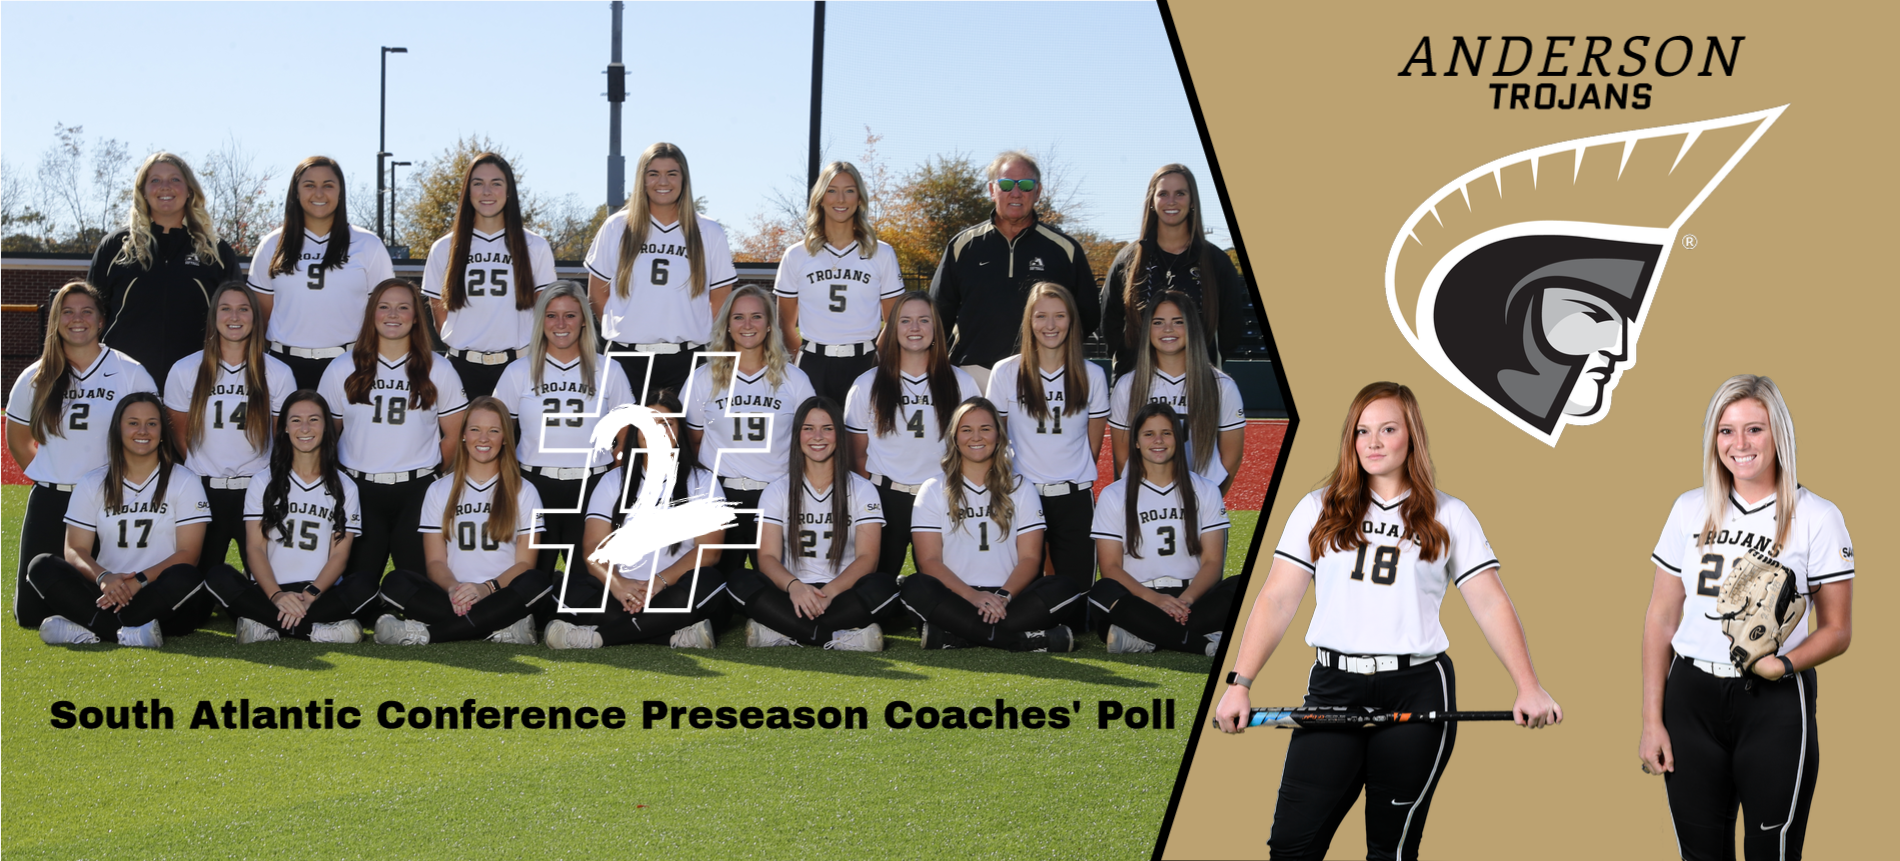 Softball Picked Second In South Atlantic Conference Preseason Coaches' Poll; Boatner and Duncan Named to Preseason First Team